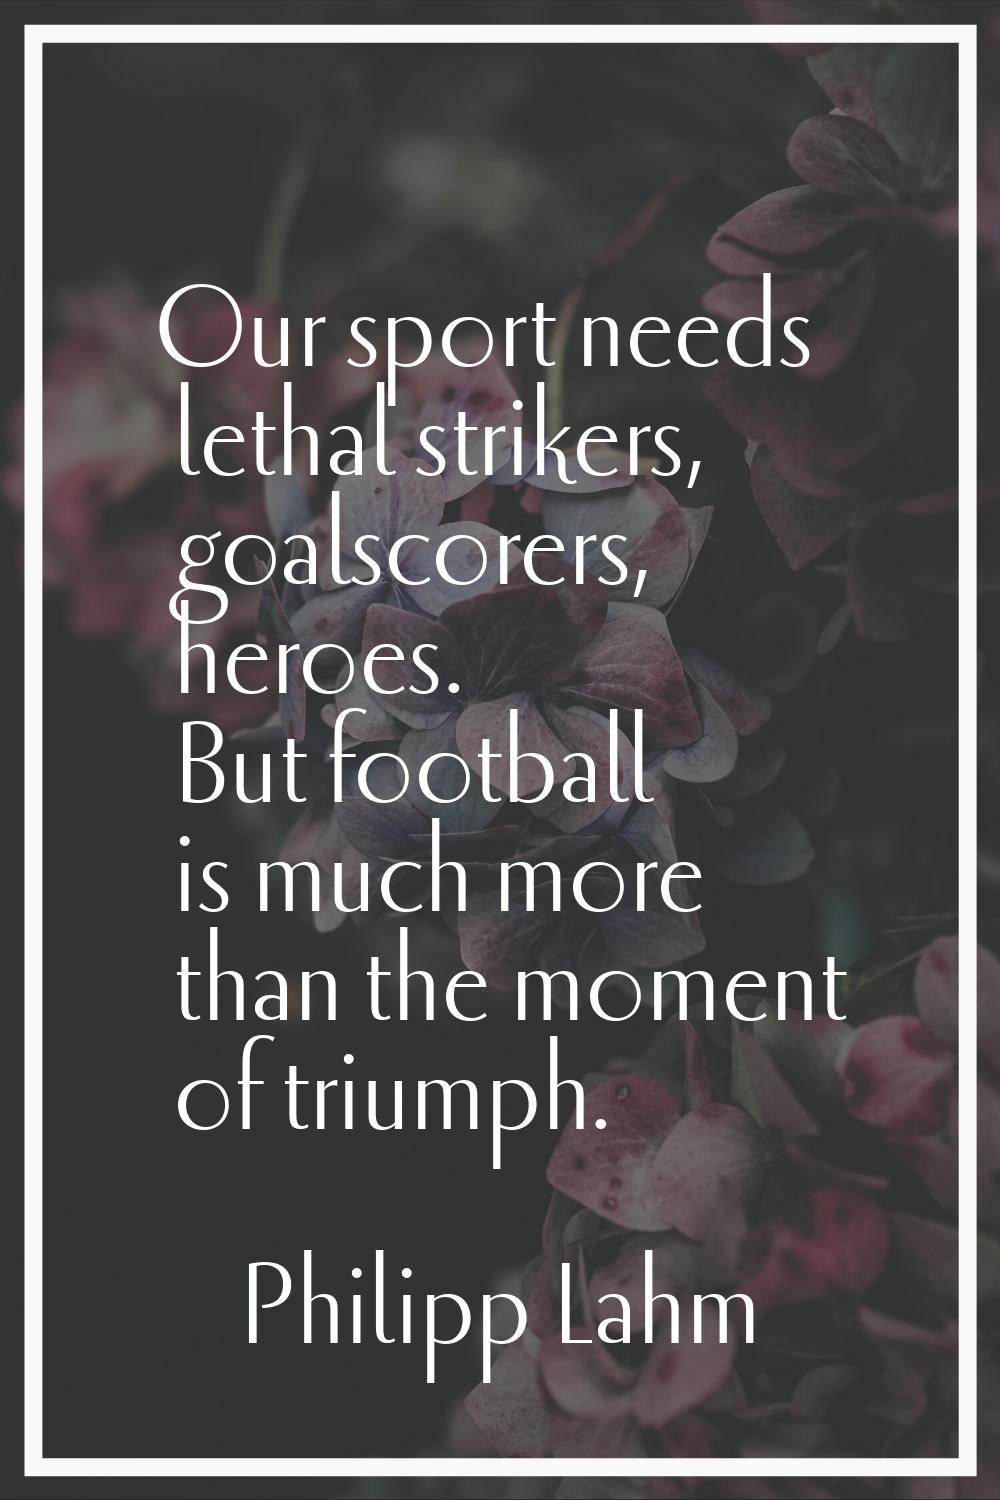 Our sport needs lethal strikers, goalscorers, heroes. But football is much more than the moment of 